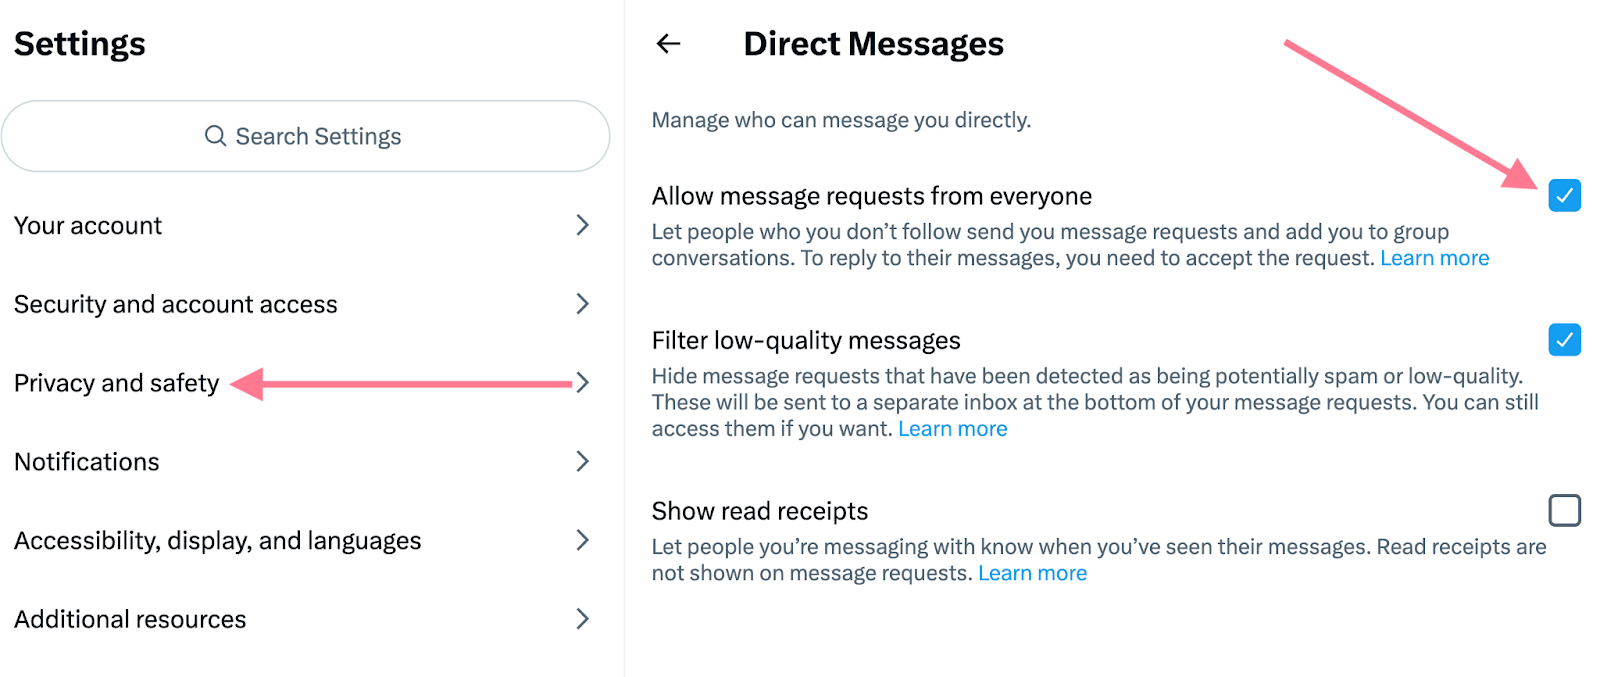 Allow message requests from everyone checkbox